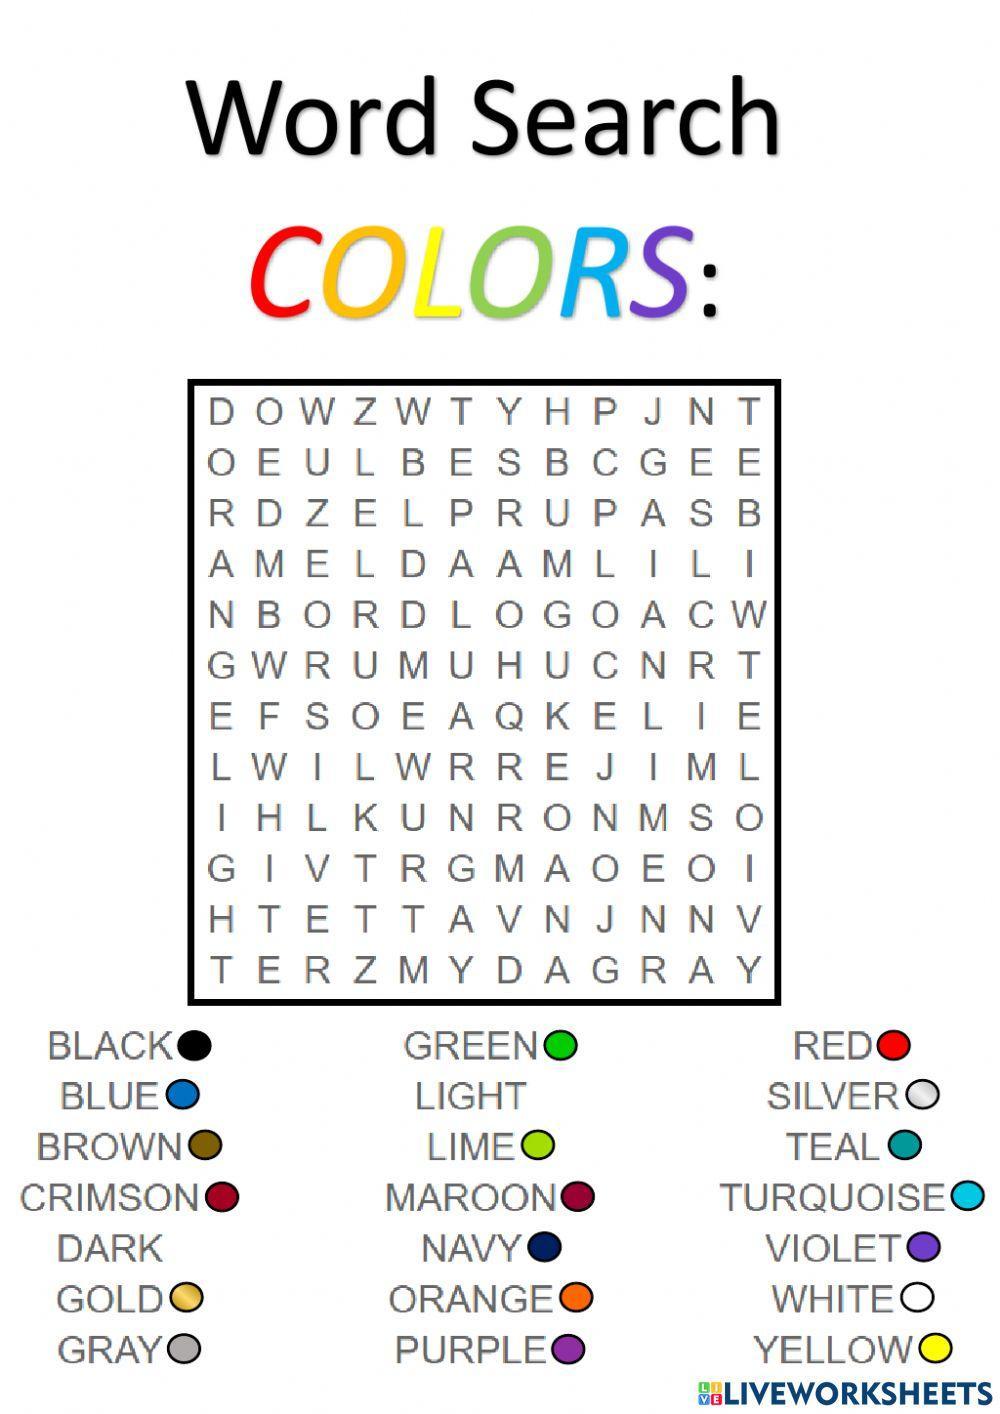 WORD SEARCH: colors